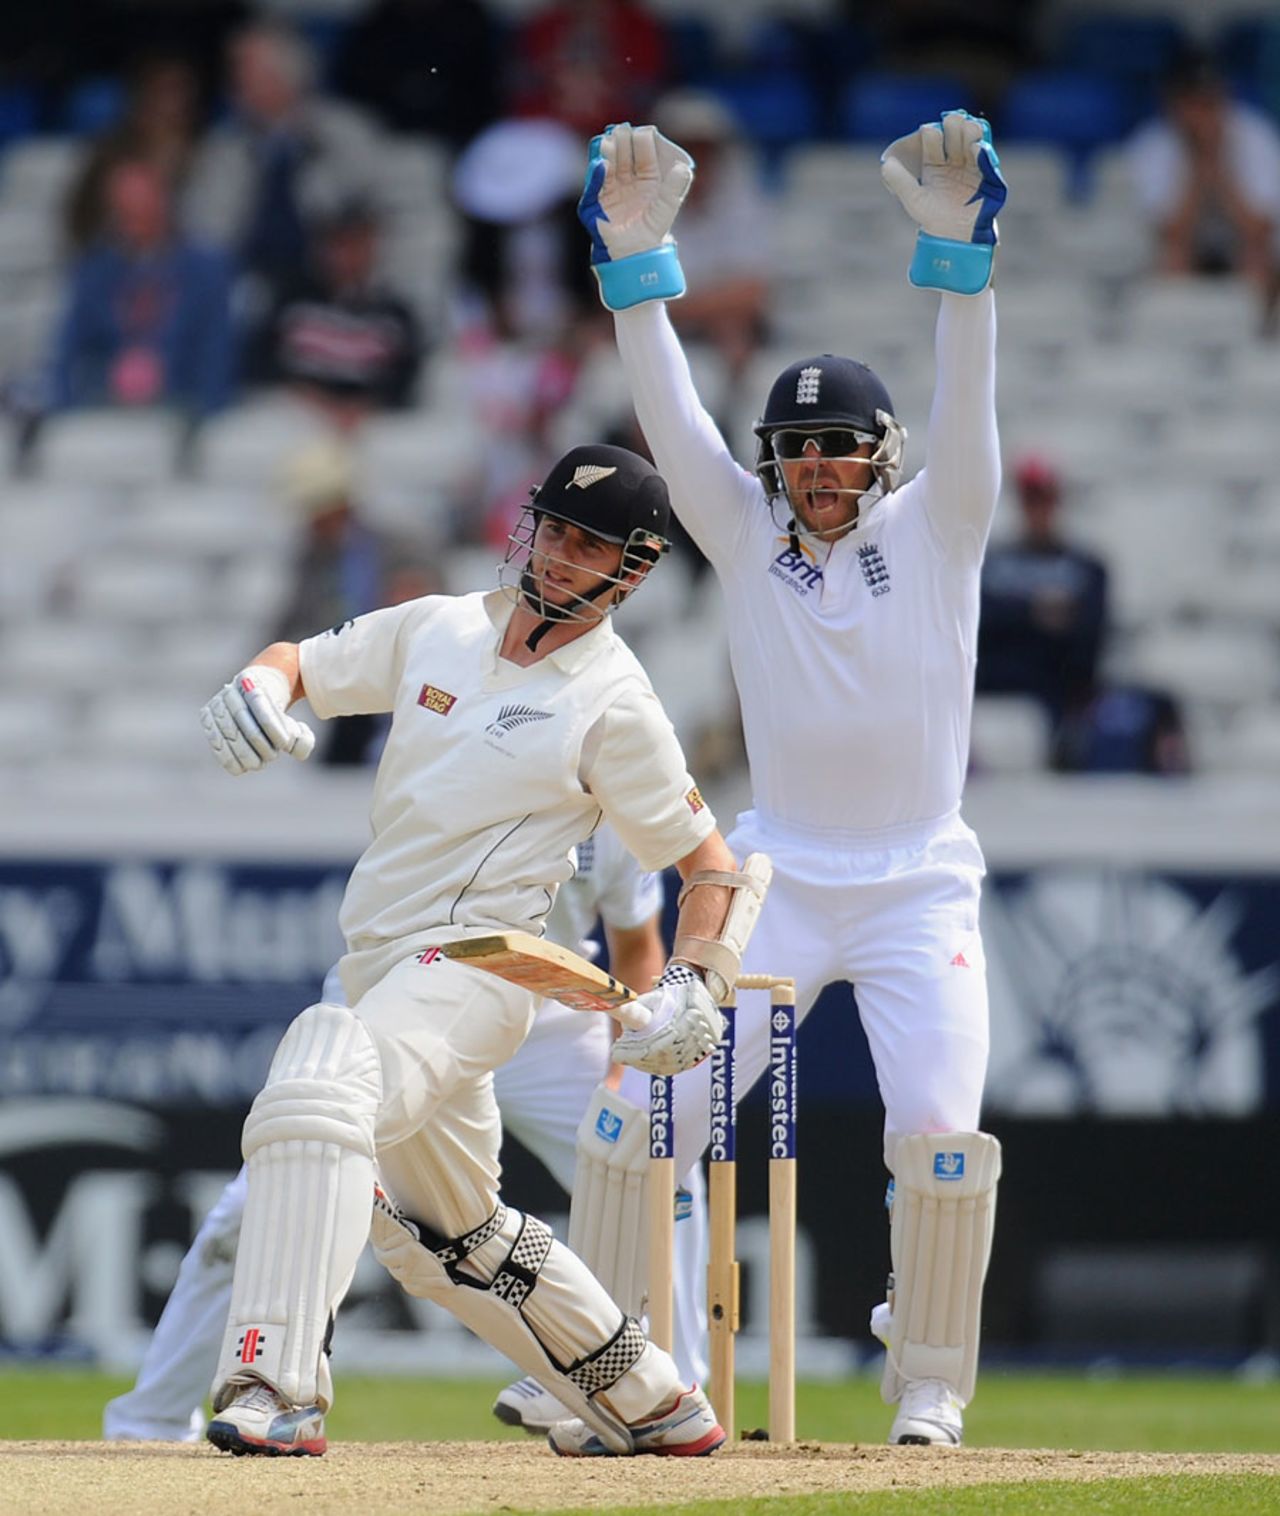 Kane Williamson was lbw to Graeme Swann for the second time in the match, England v New Zealand, 2nd Investec Test, Headingley, 4th day, May 27, 2013